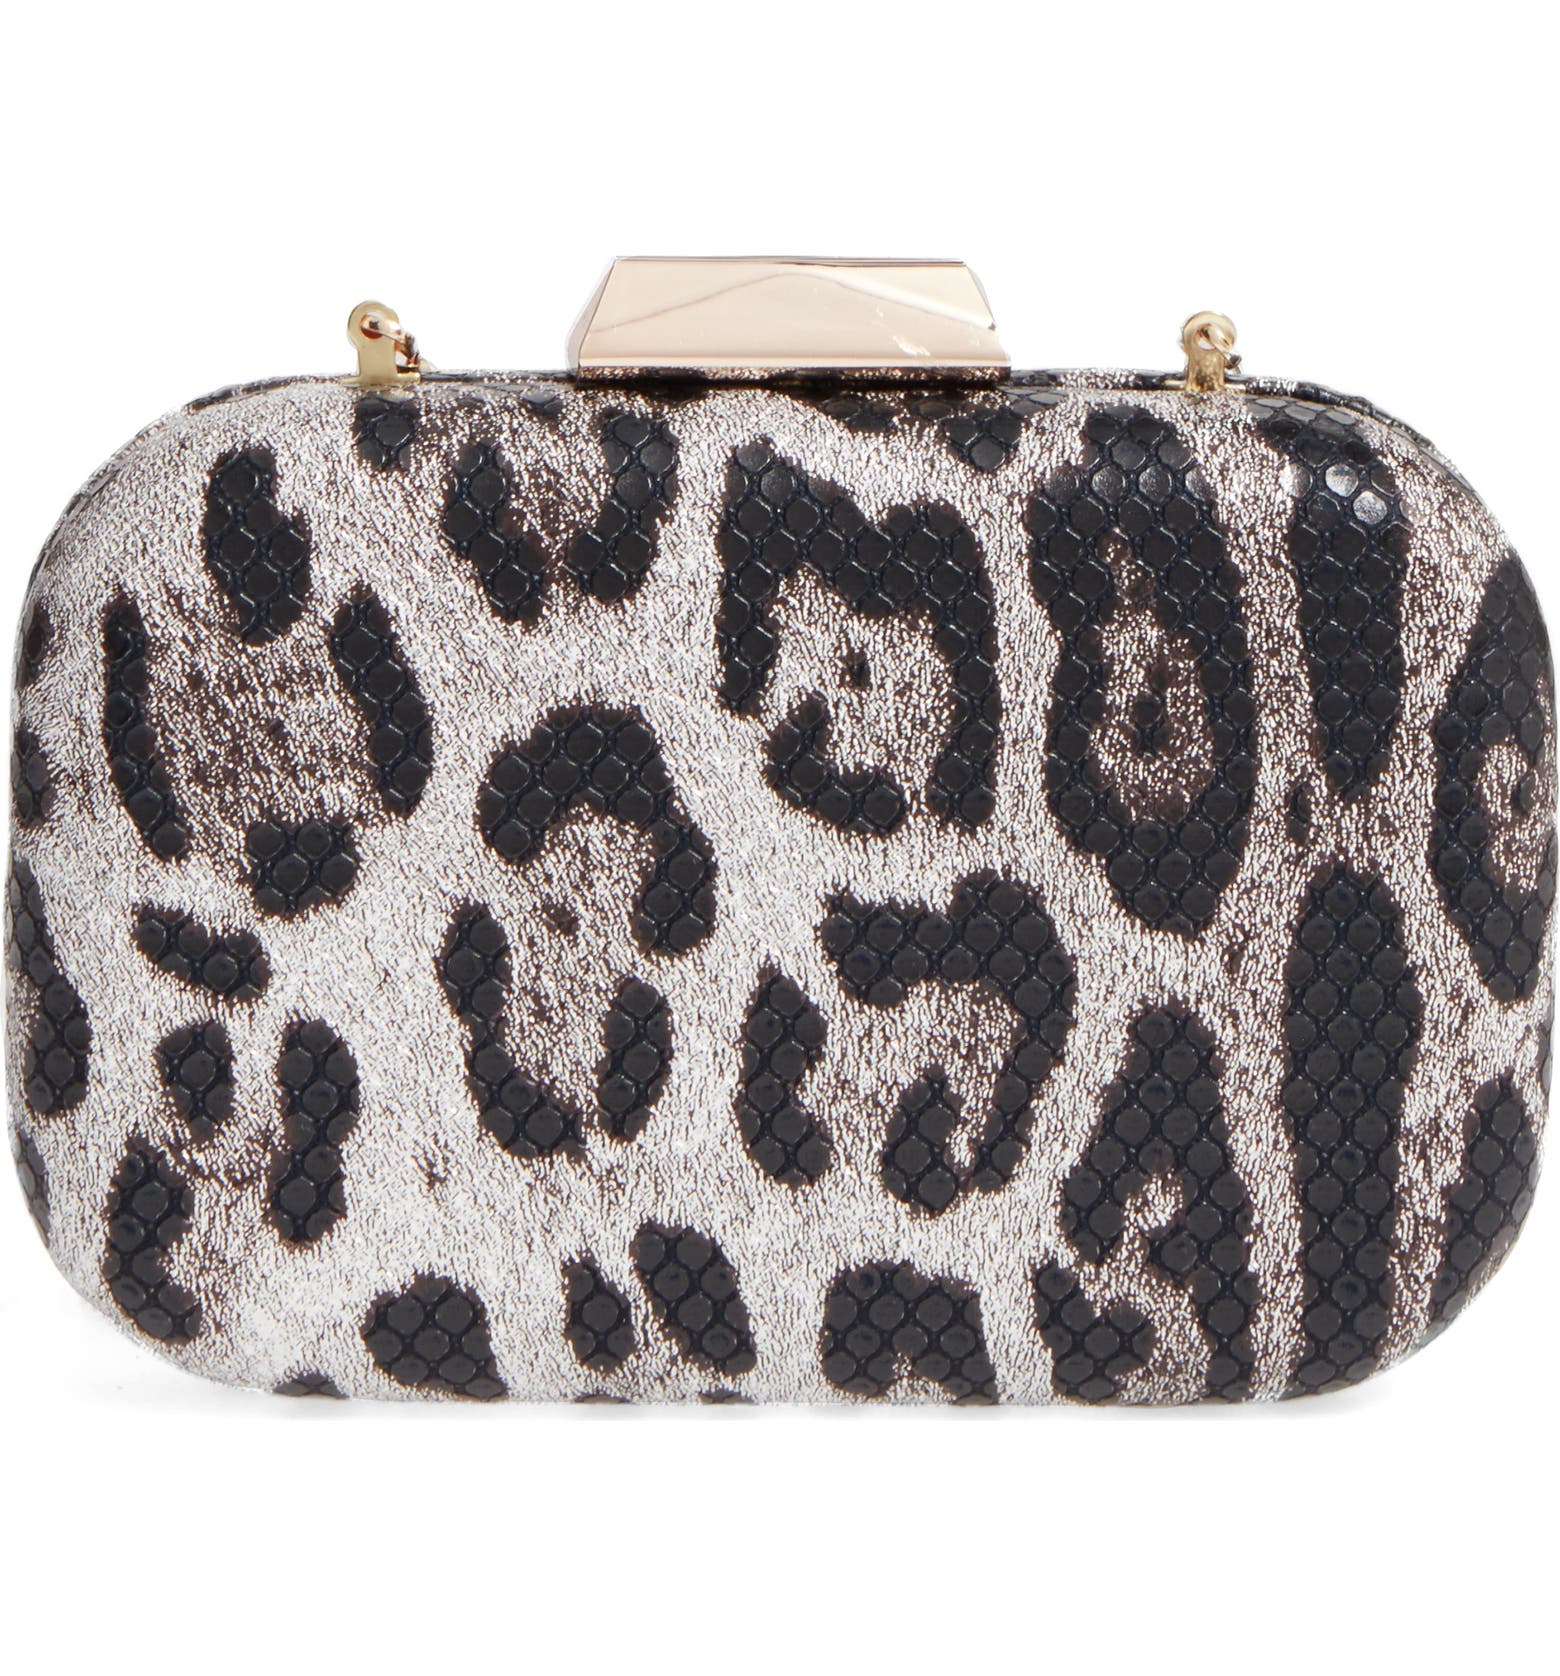 Natasha Couture Leopard Print Faux Leather Frame Clutch | Nordstrom